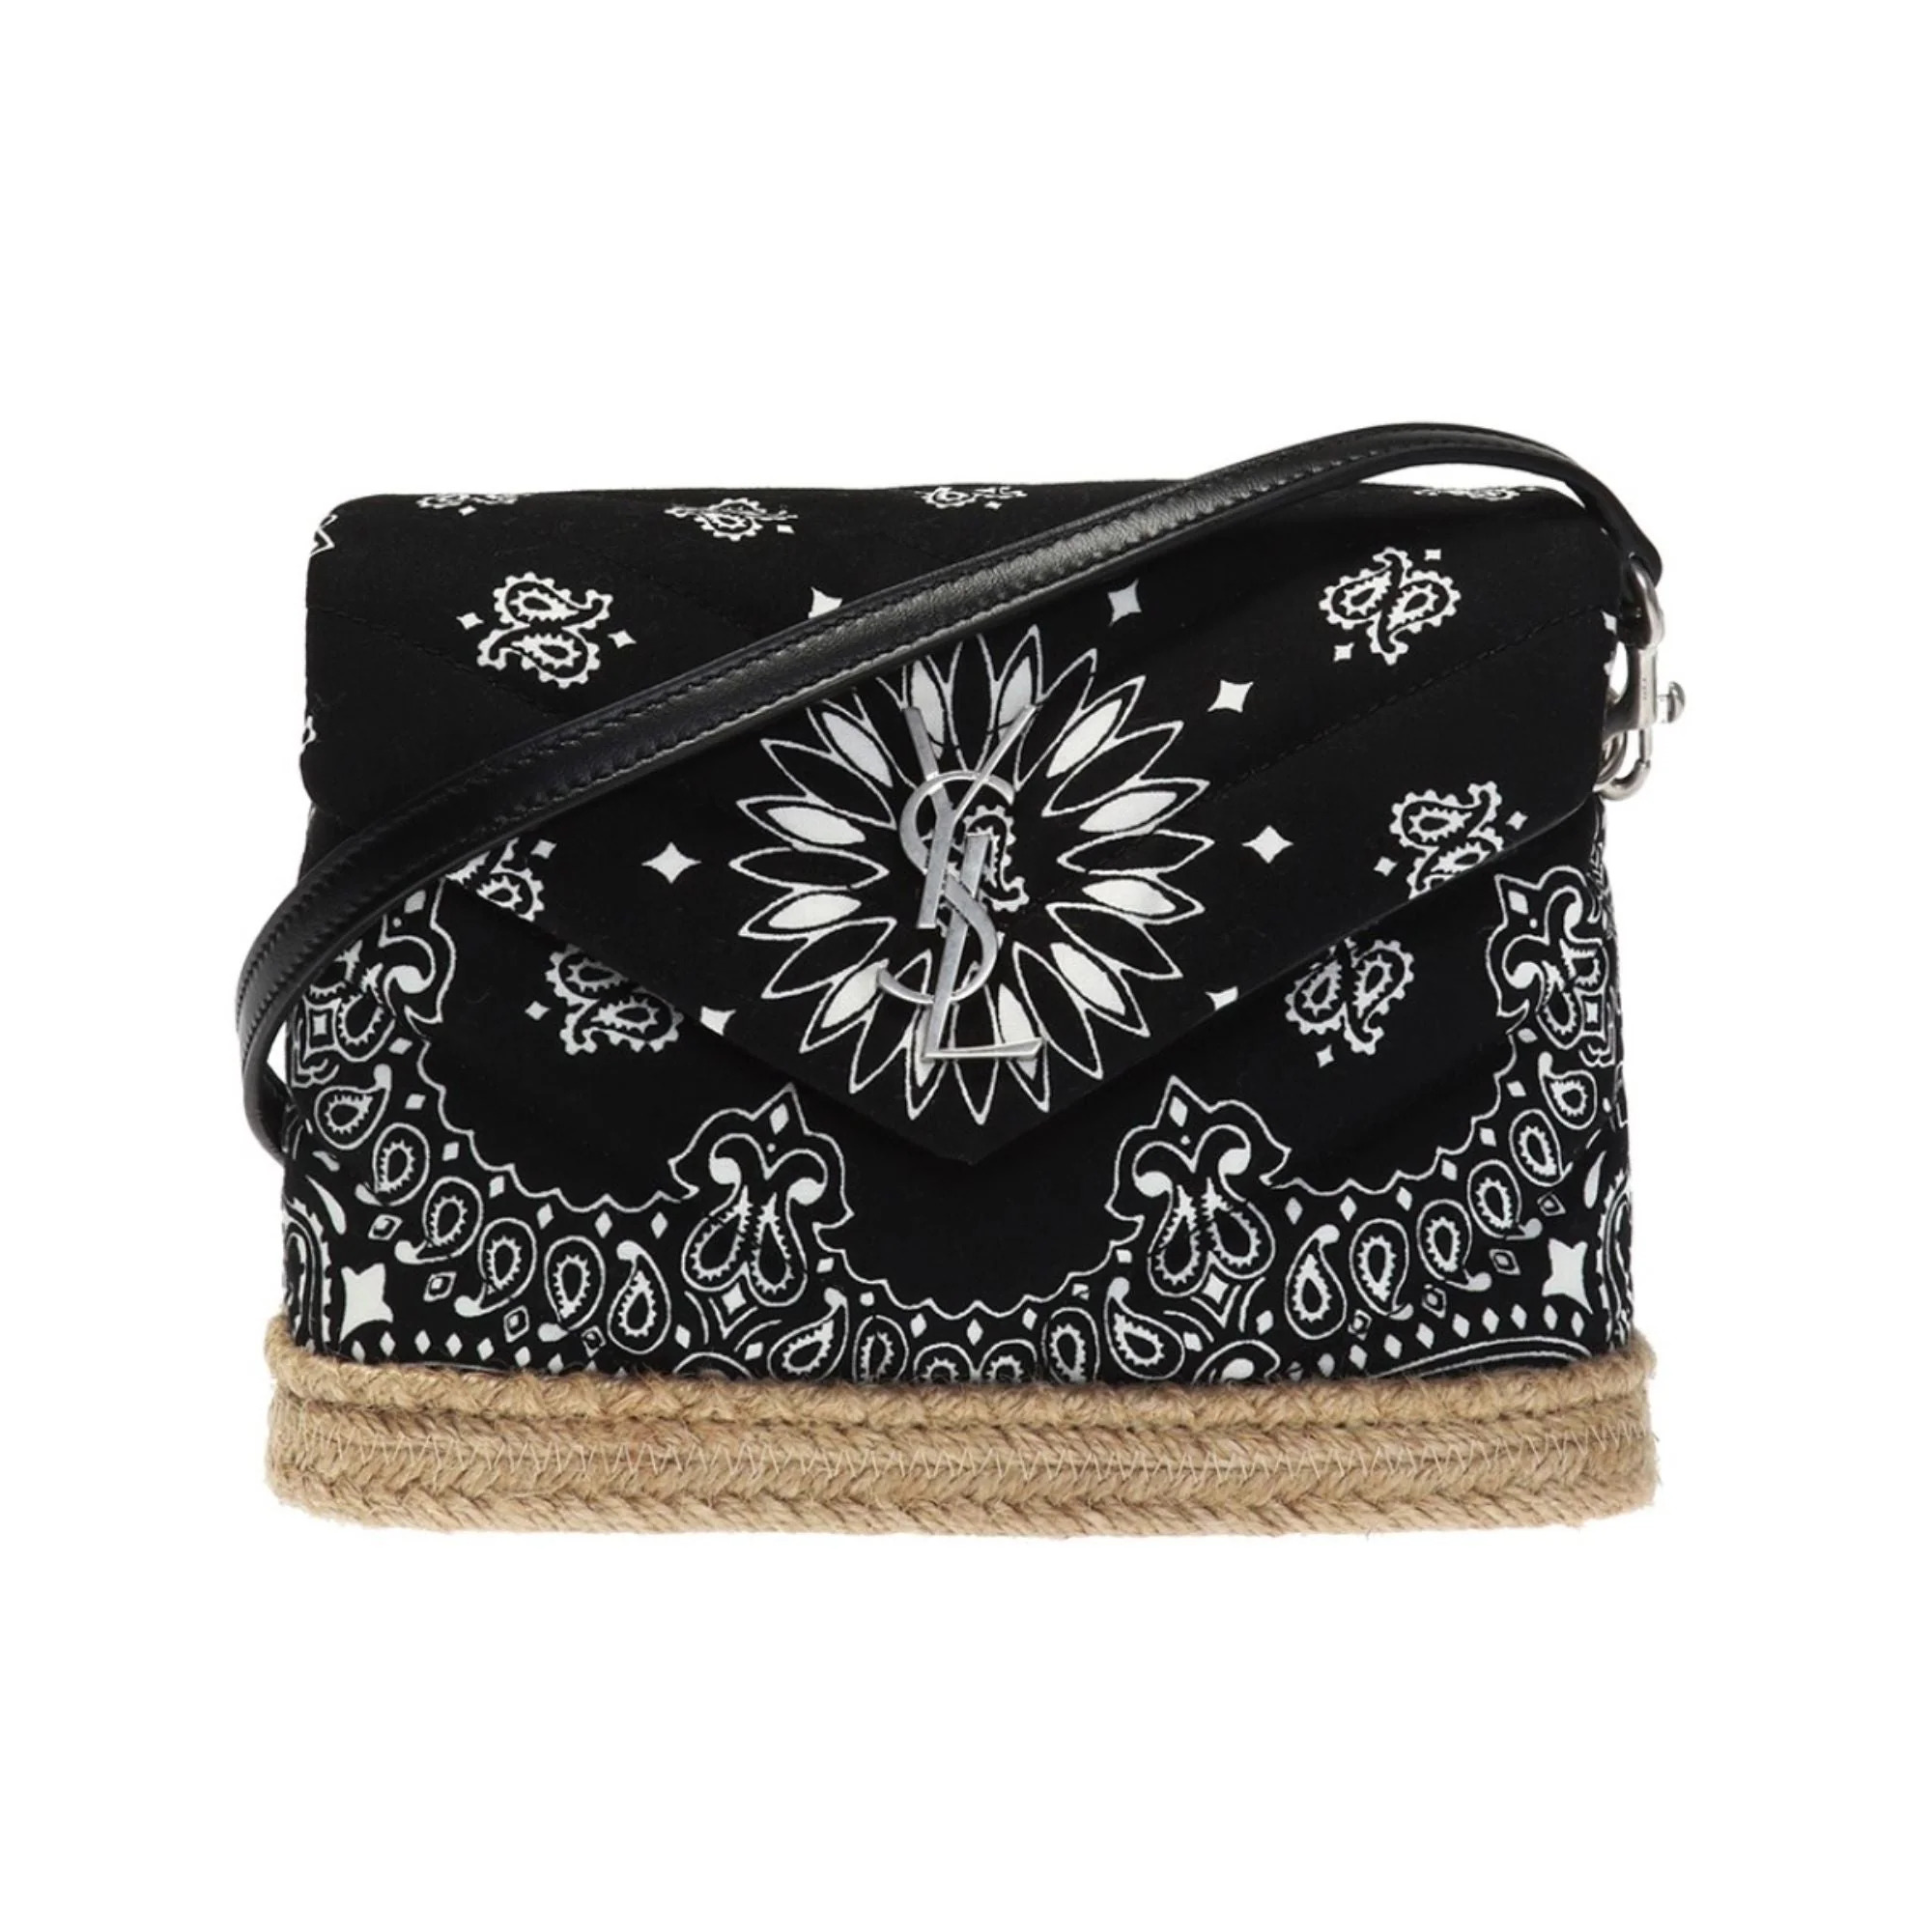 Saint Laurent Loulou Black Paisley Quilted Small Cross Body Bag 531045 - image 1 of 8